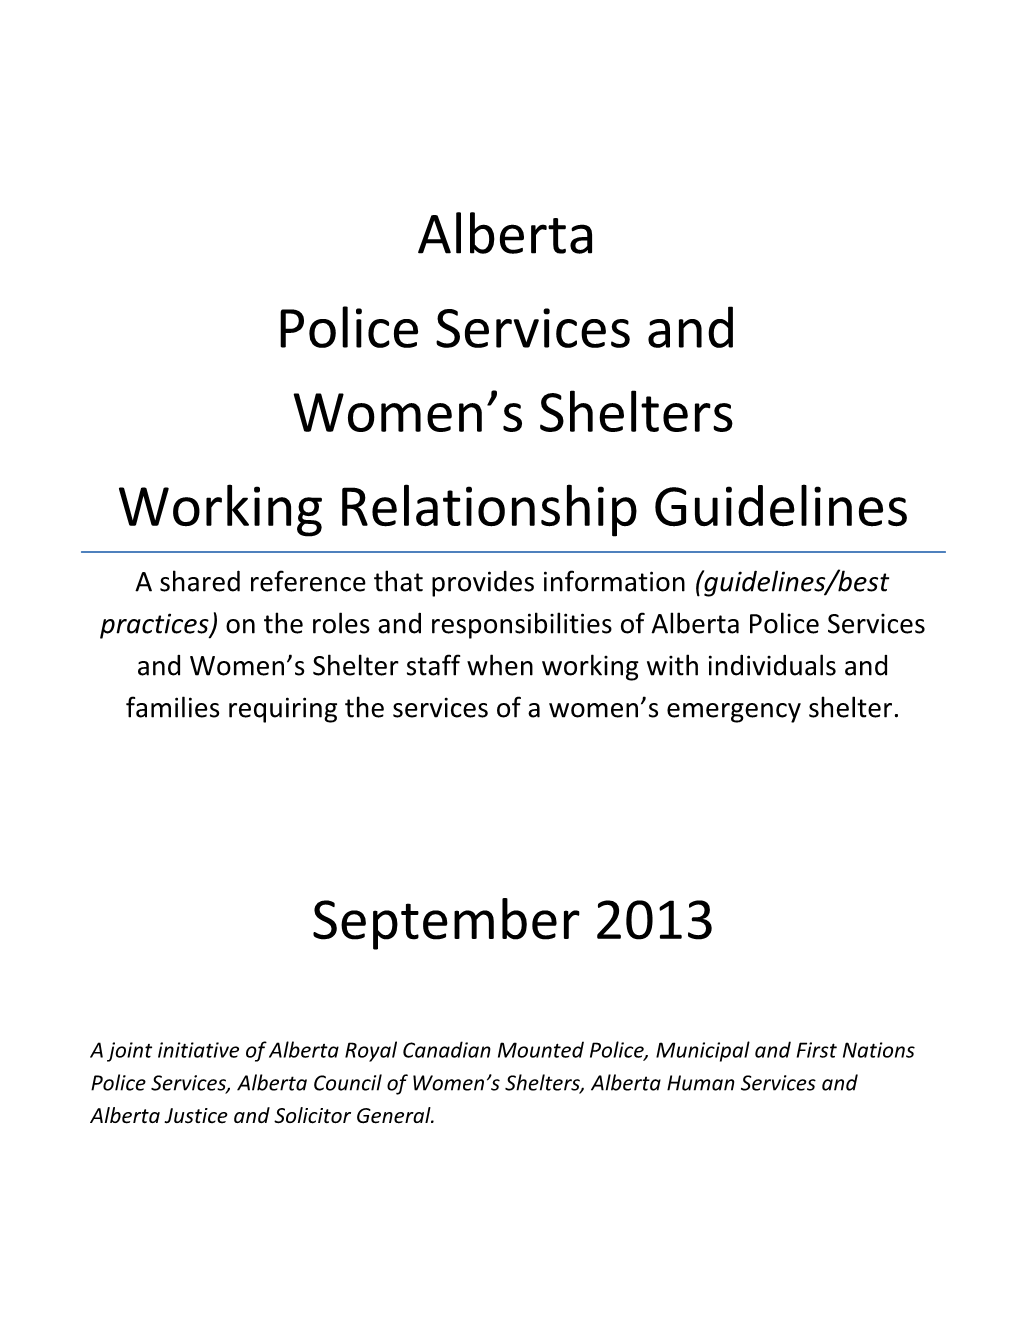 Alberta Police Services and Women S Shelters Working Relationships Guidelines September 20131